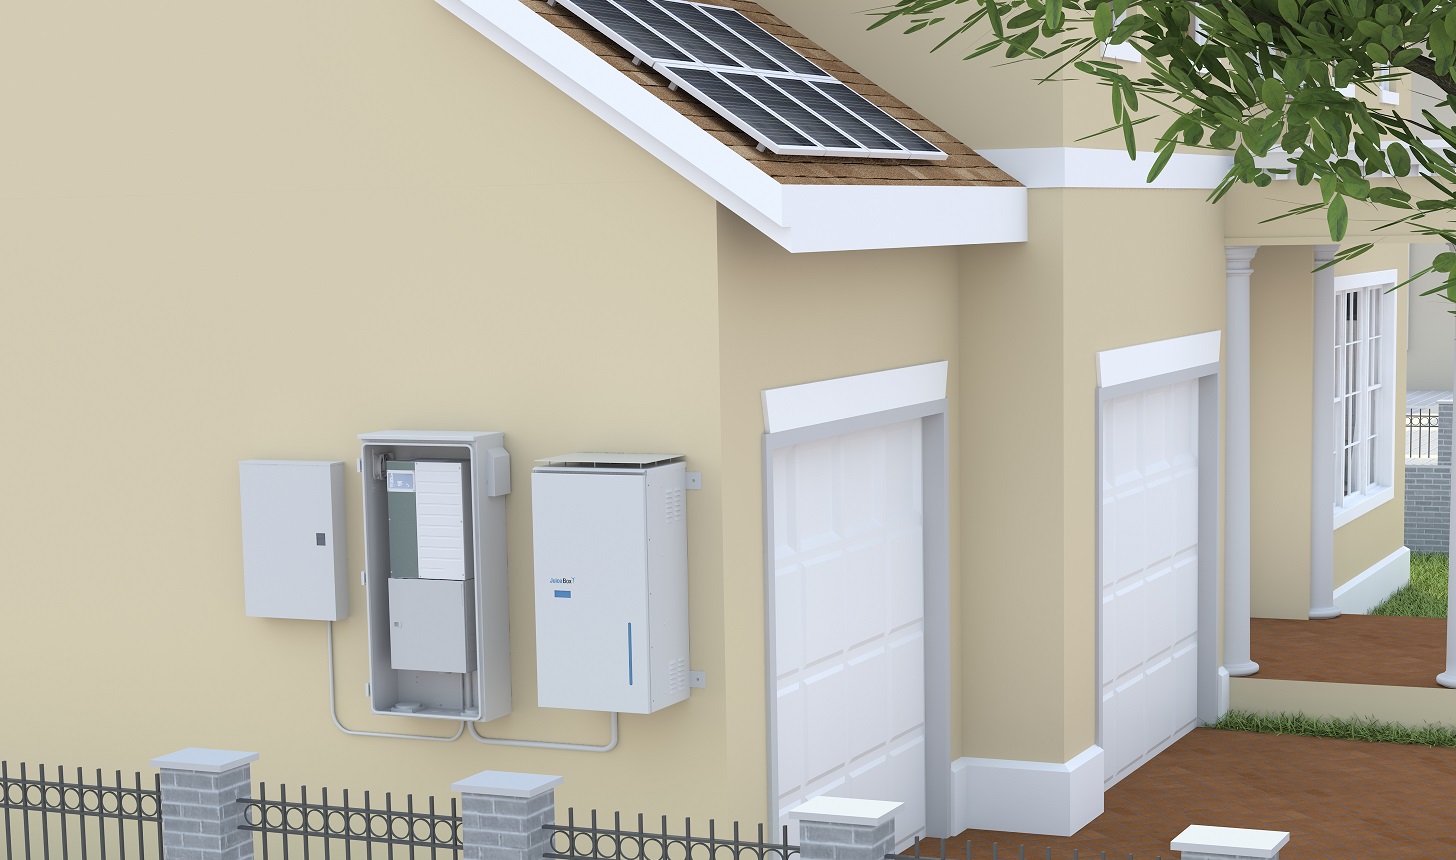 The JuiceBox 8.6kWh Energy Storage System shown in a white, outdoor configuration